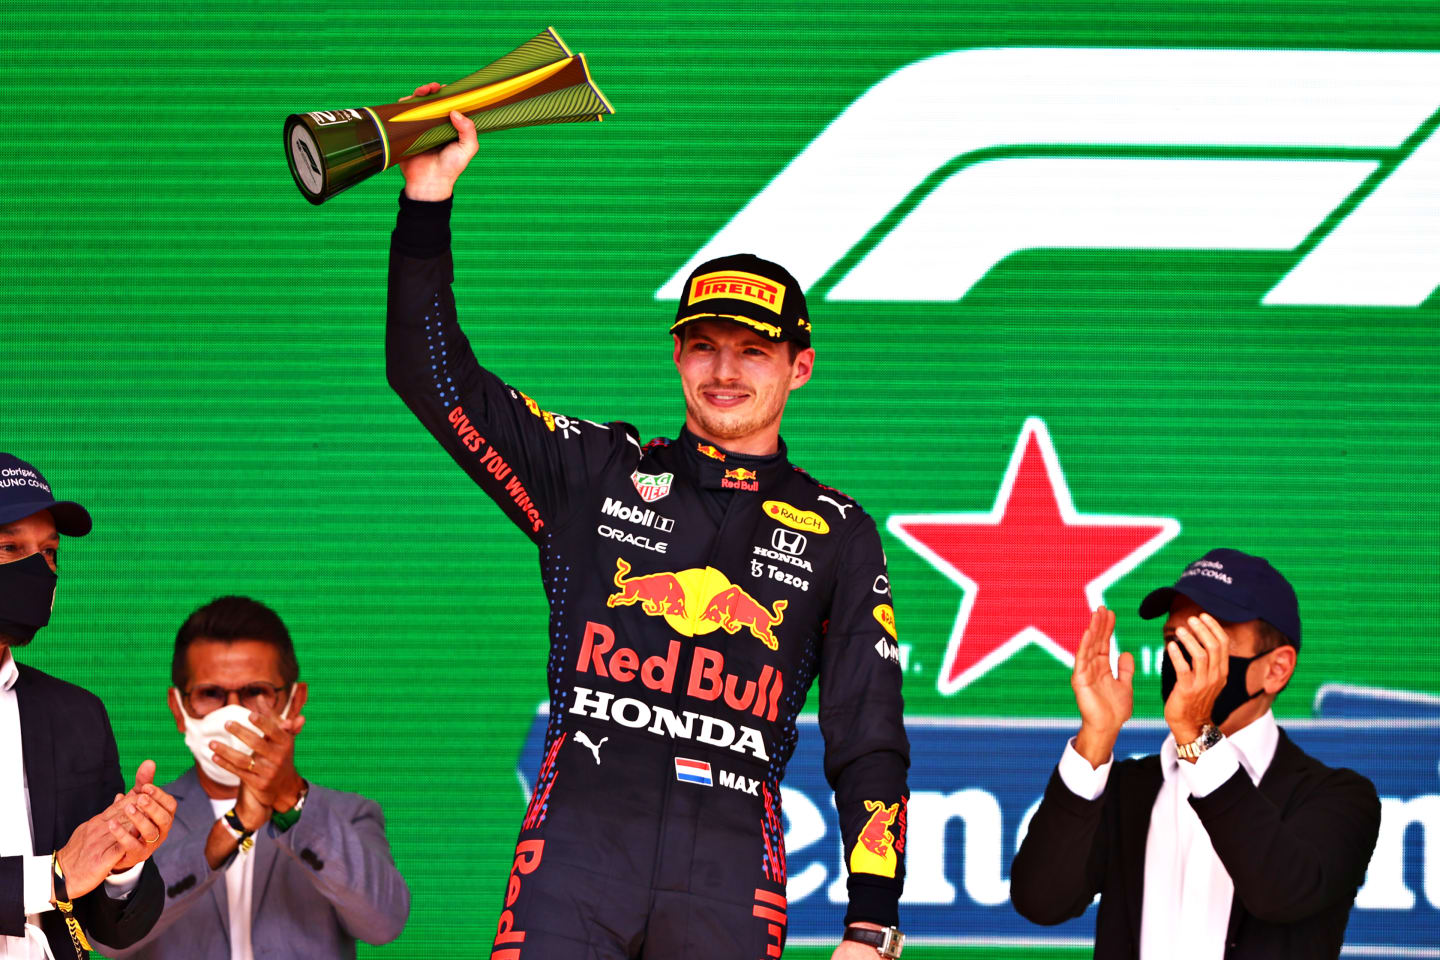 SAO PAULO, BRAZIL - NOVEMBER 14: Second placed Max Verstappen of Netherlands and Red Bull Racing